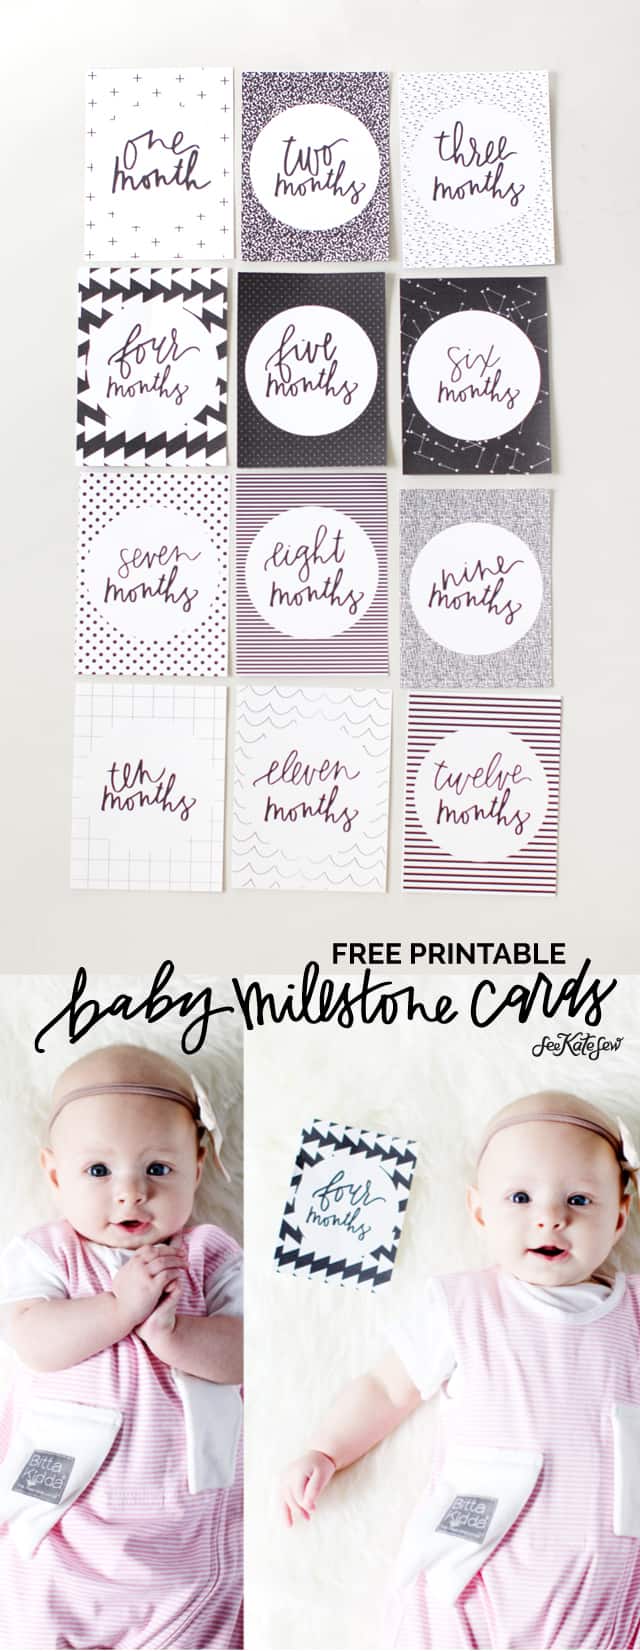 FREE printable month-by-month cards | baby milestone cards | diy milestone cards | monthly milestone cards for babies | free printable milestone cards || See Kate Sew #milestonecards #babydiy #babymilestones #seekatesew